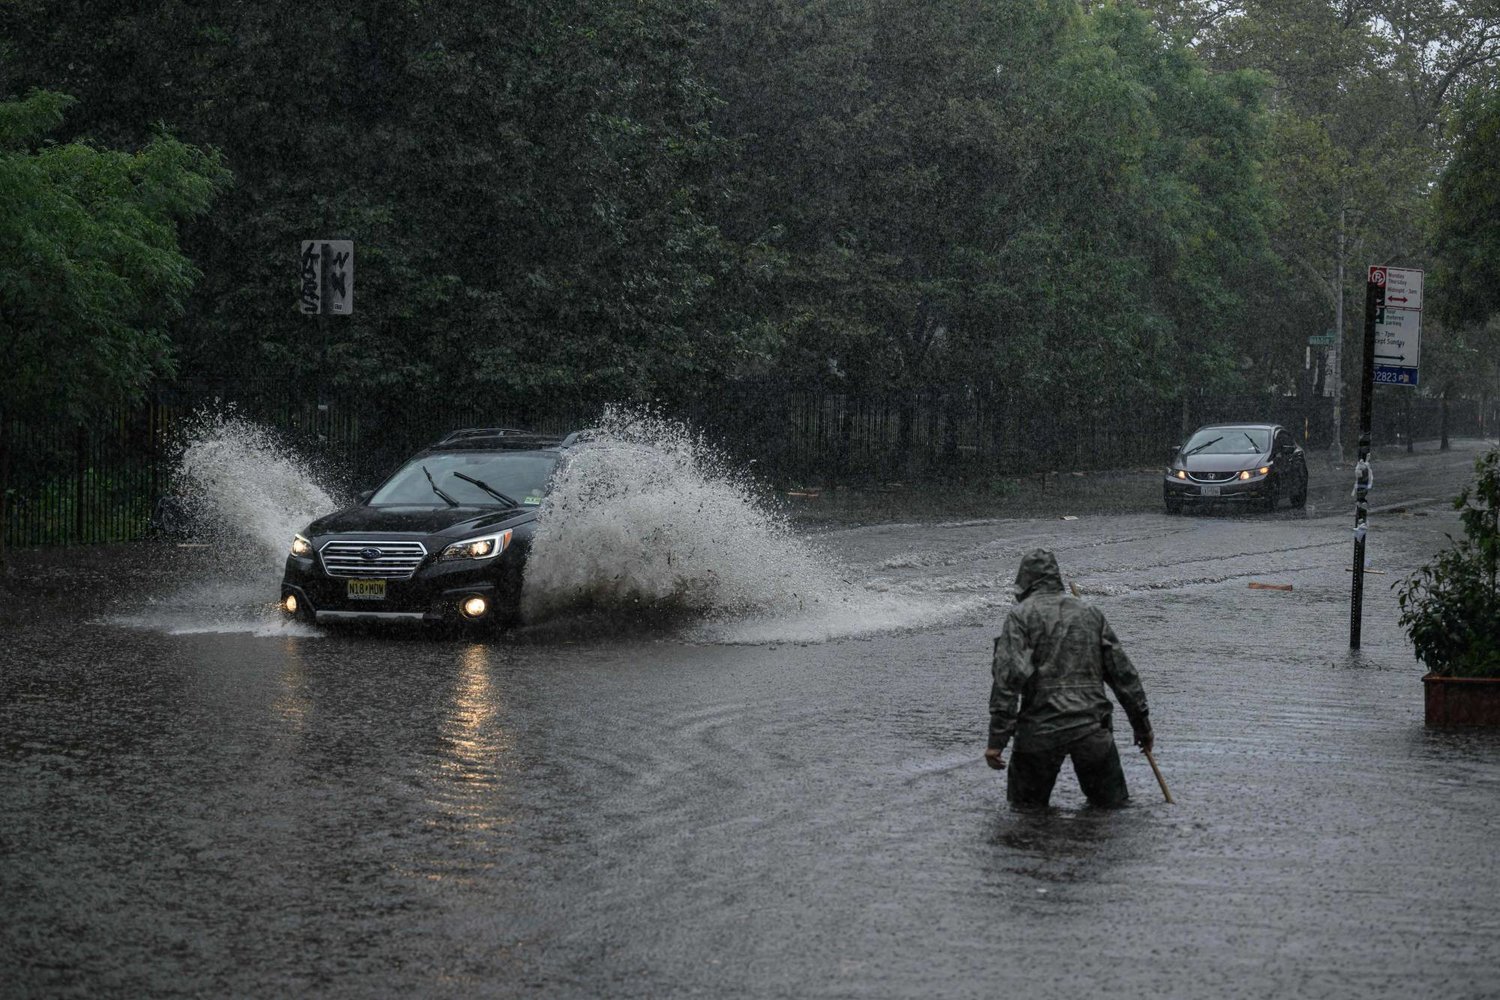 A man clears debris from a drain as a car make their way through floodwater in Brooklyn, New York on September 29, 2023. (Photo by Ed JONES / AFP)